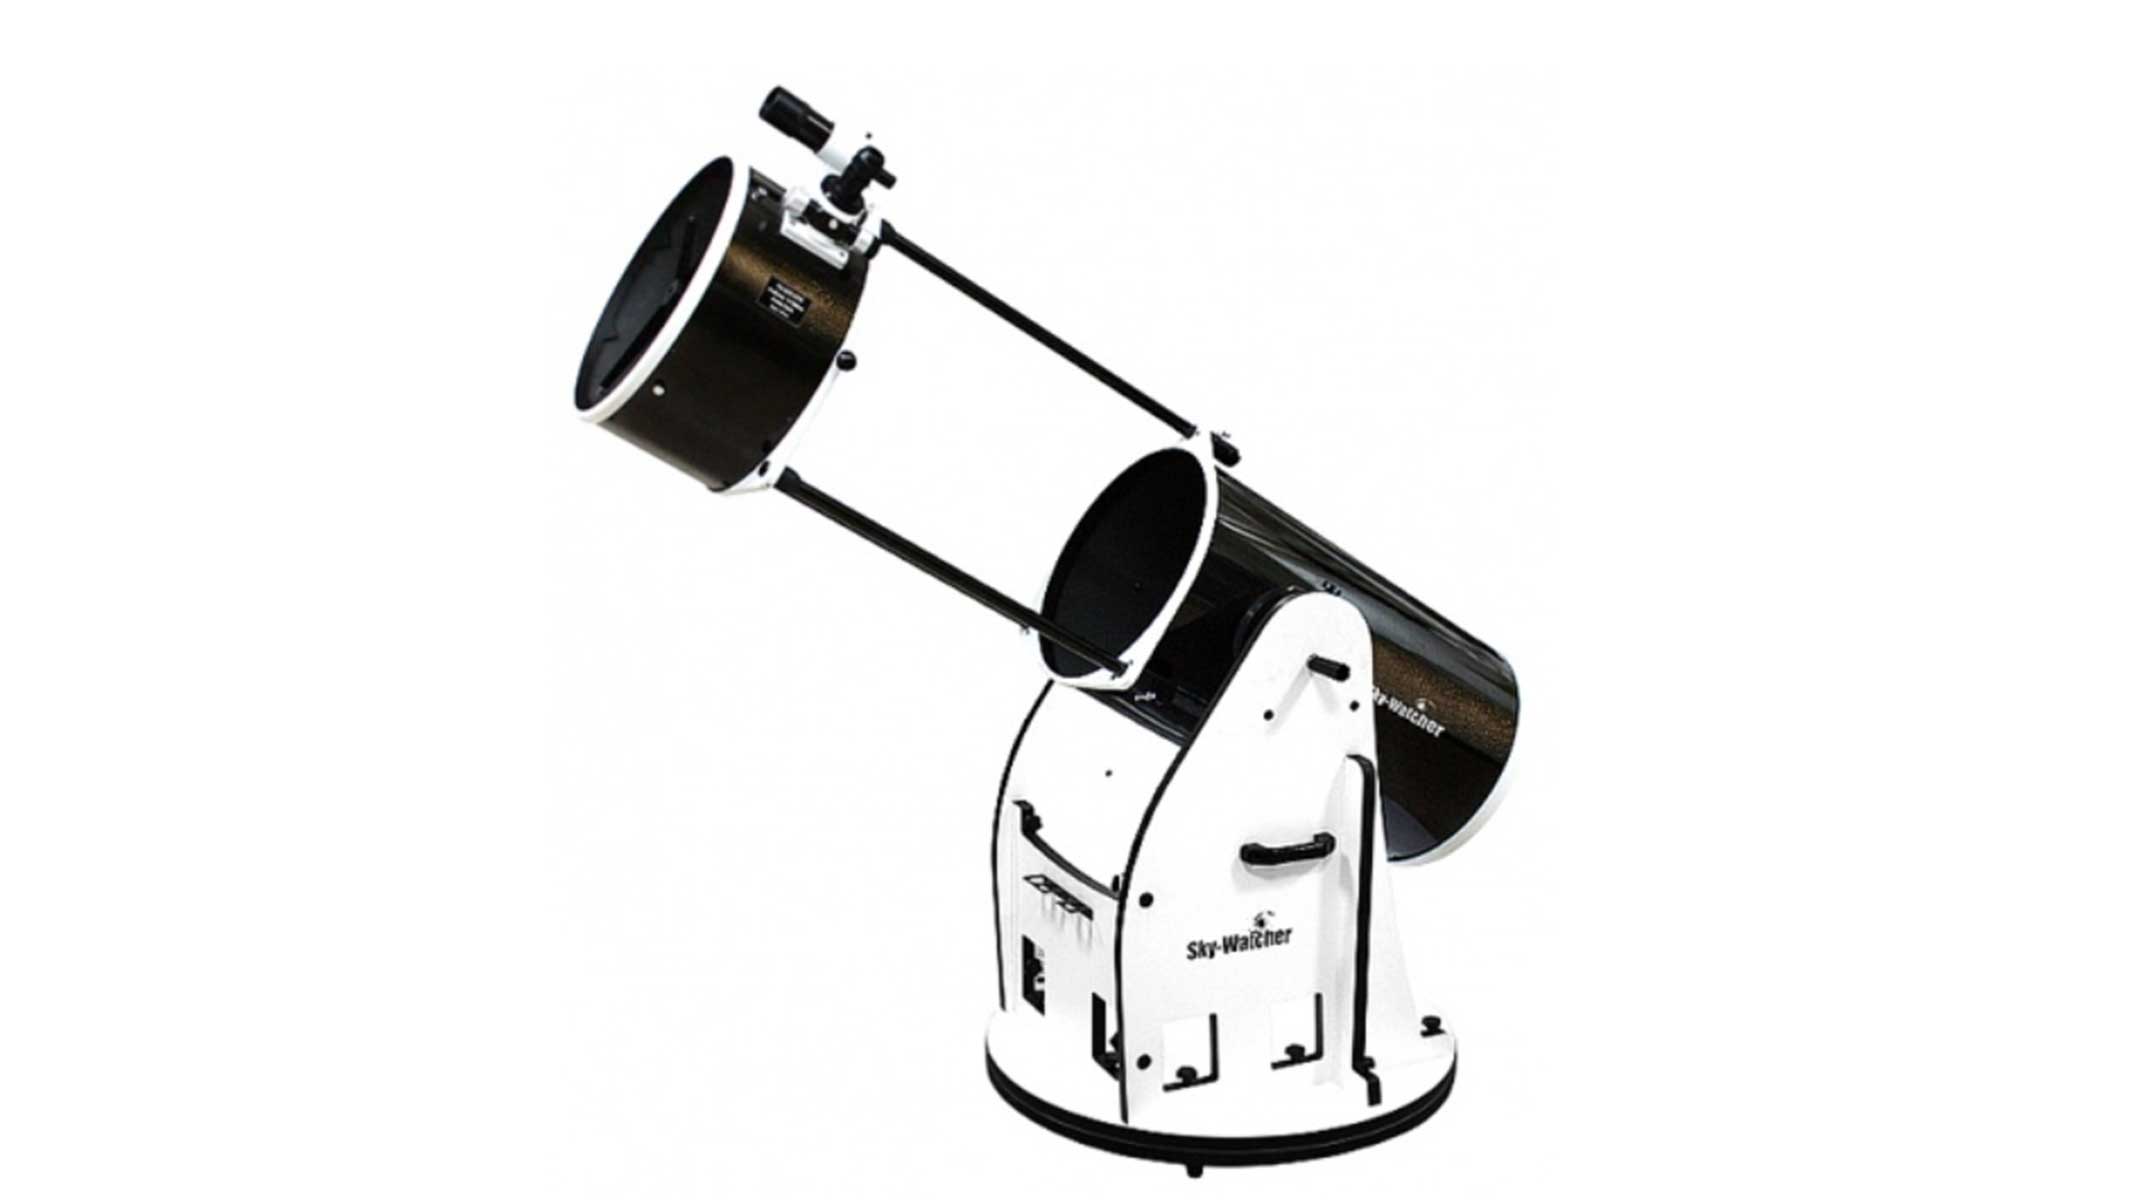 Skywatcher synscan 400p Dobsonian telescope product image